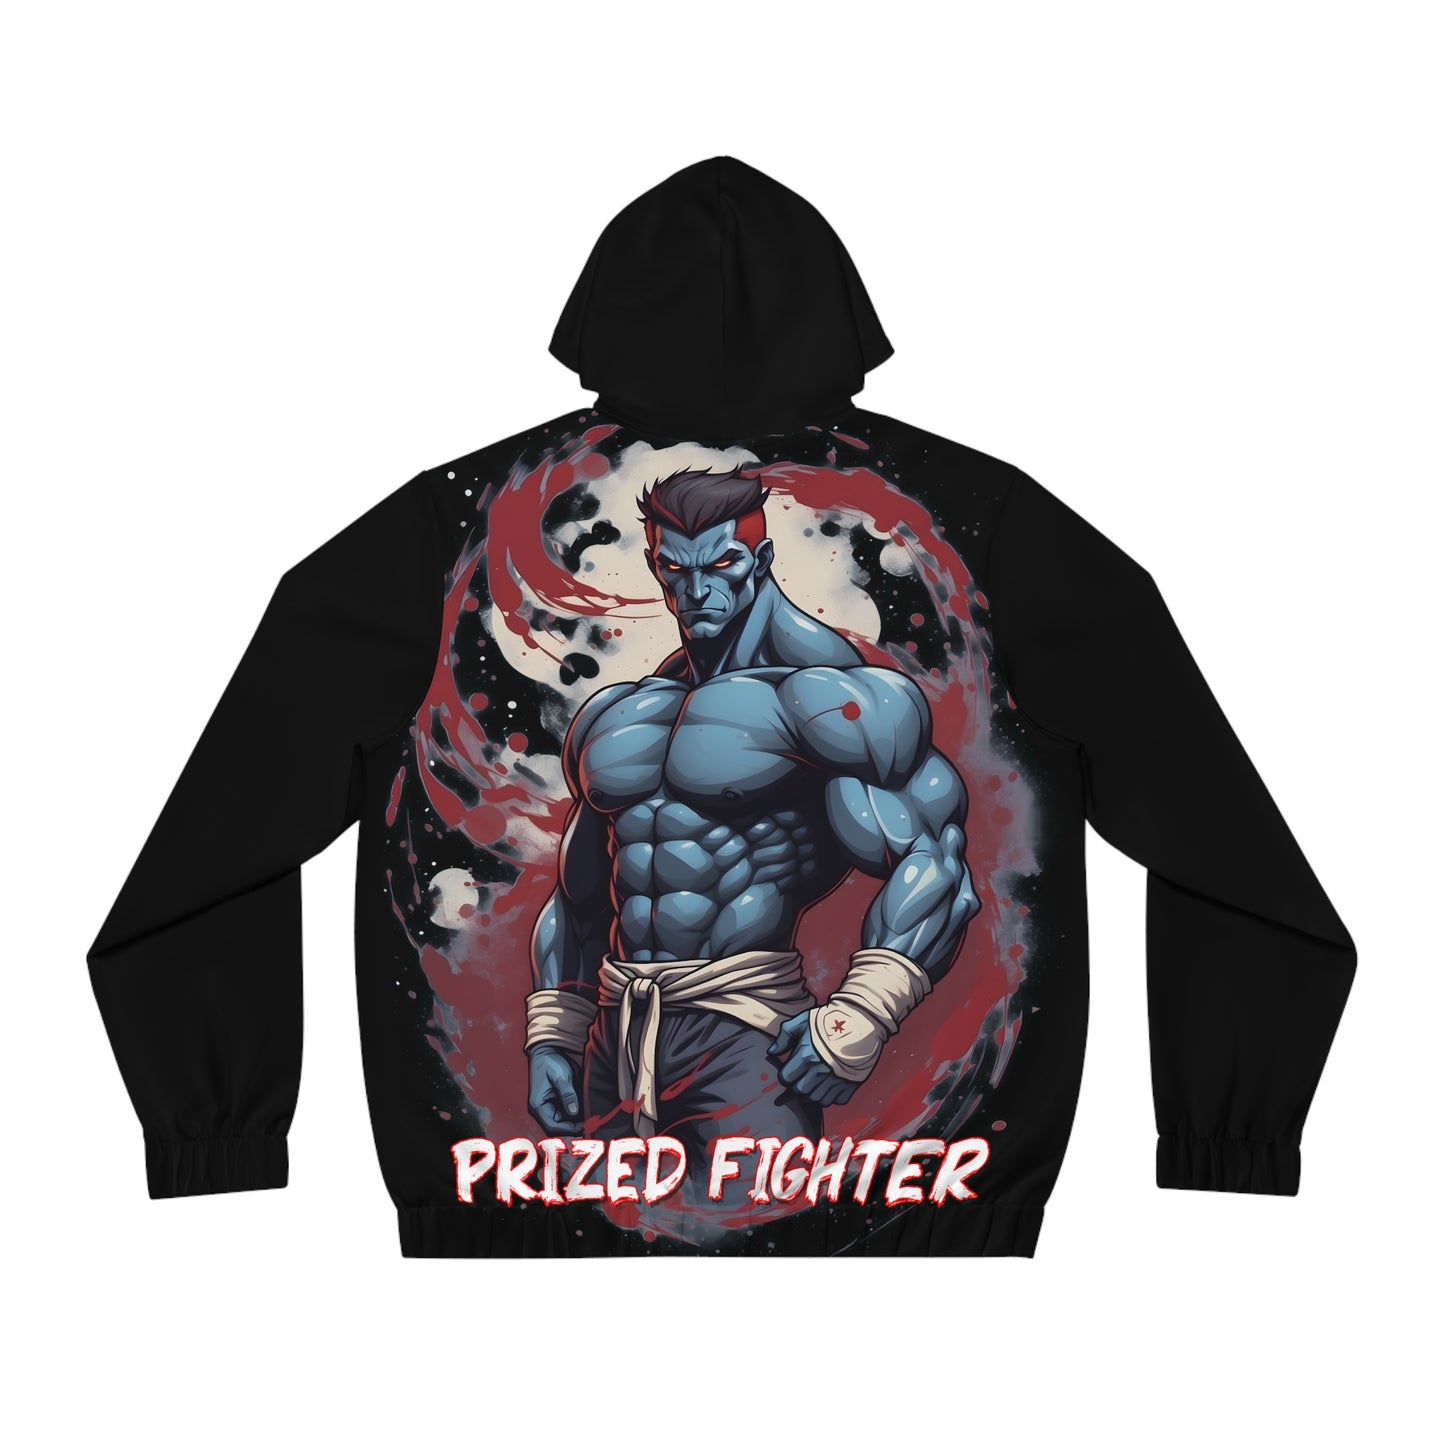 Kǎtōng Piàn - Prized Fighter Collection - America - 010 - Men's Full-Zip Hoodie